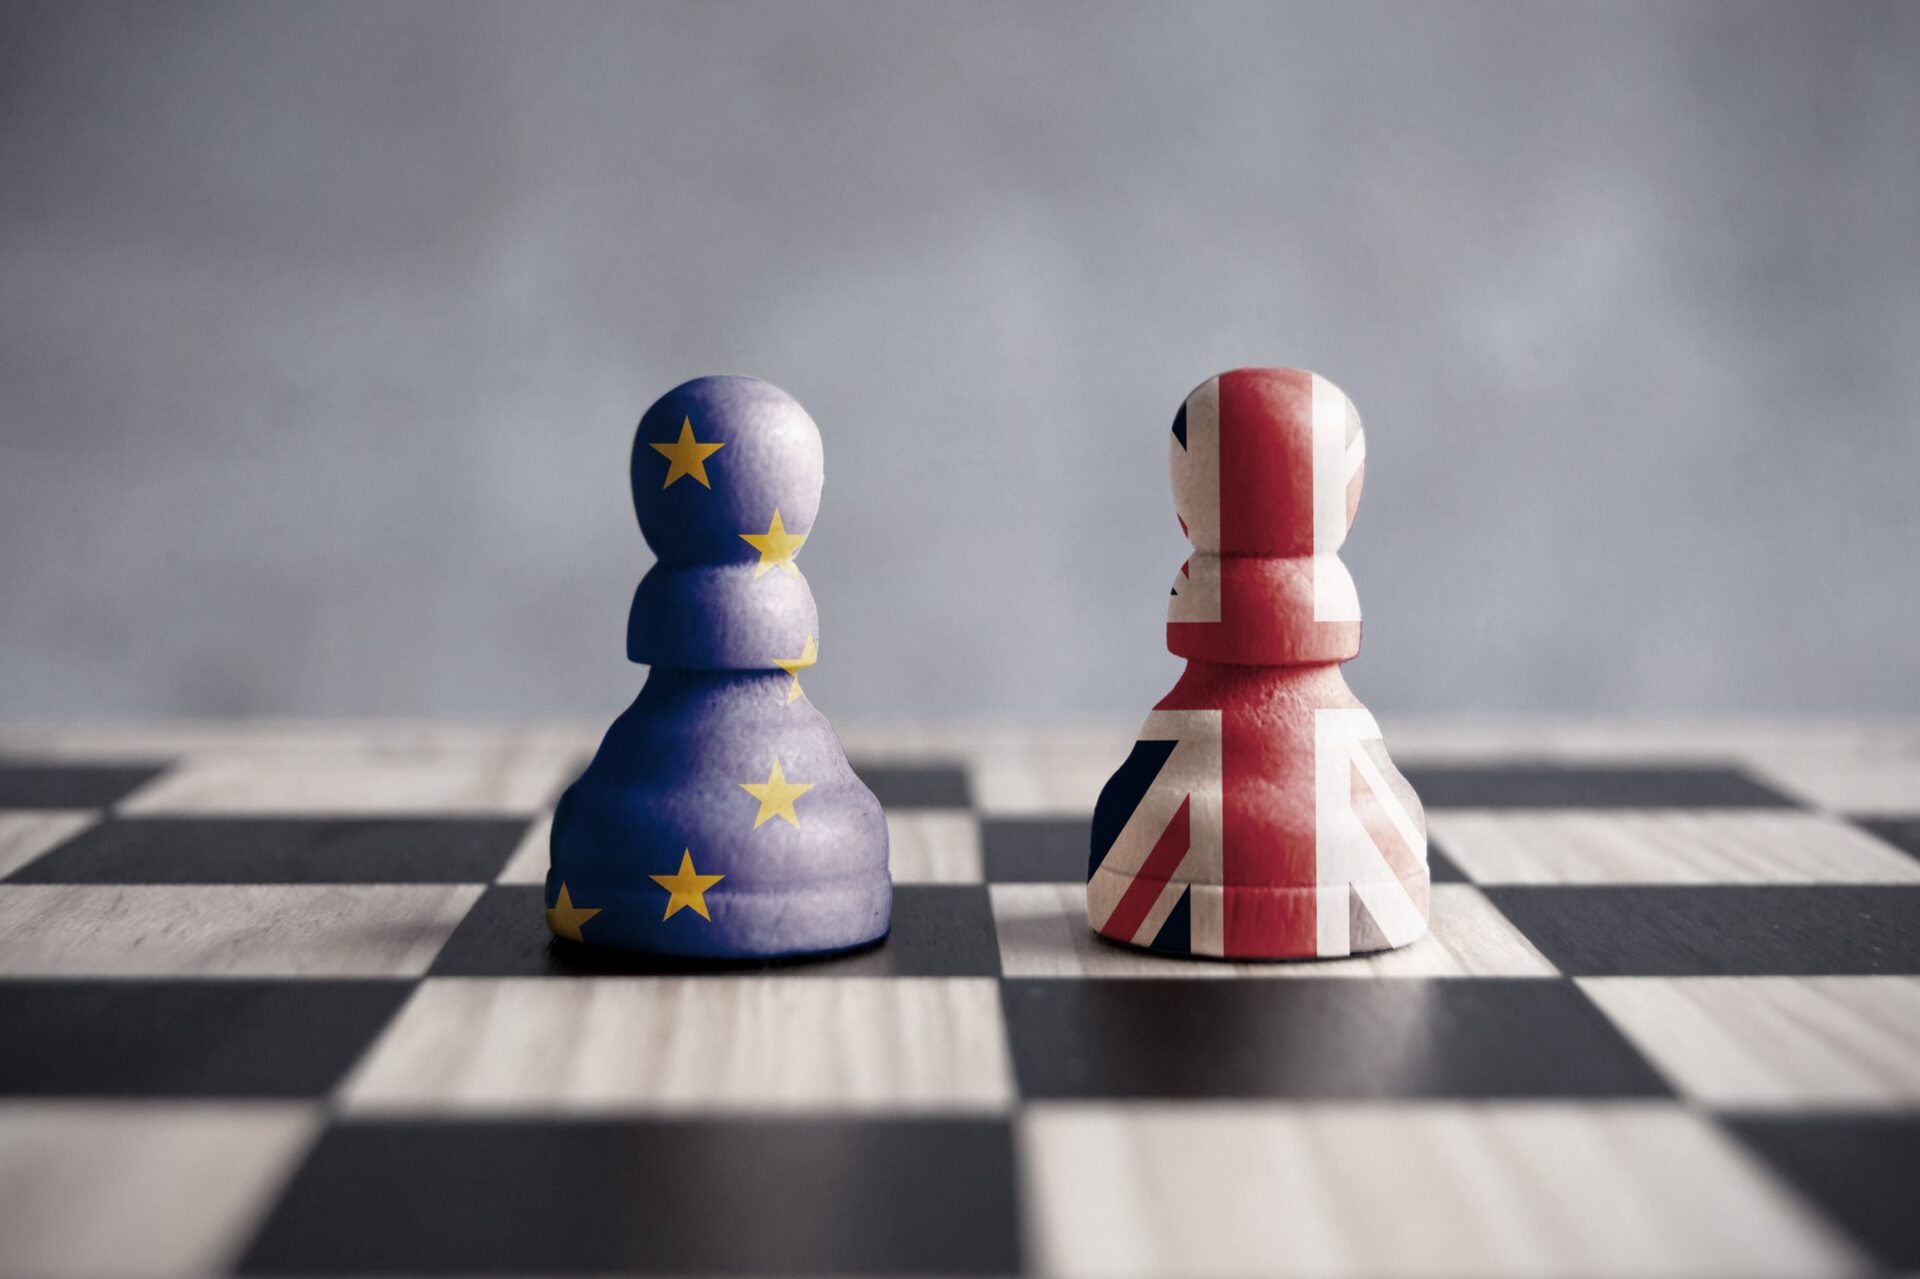 Photo of two chess pieces, one with the British Flag and one with the European flag